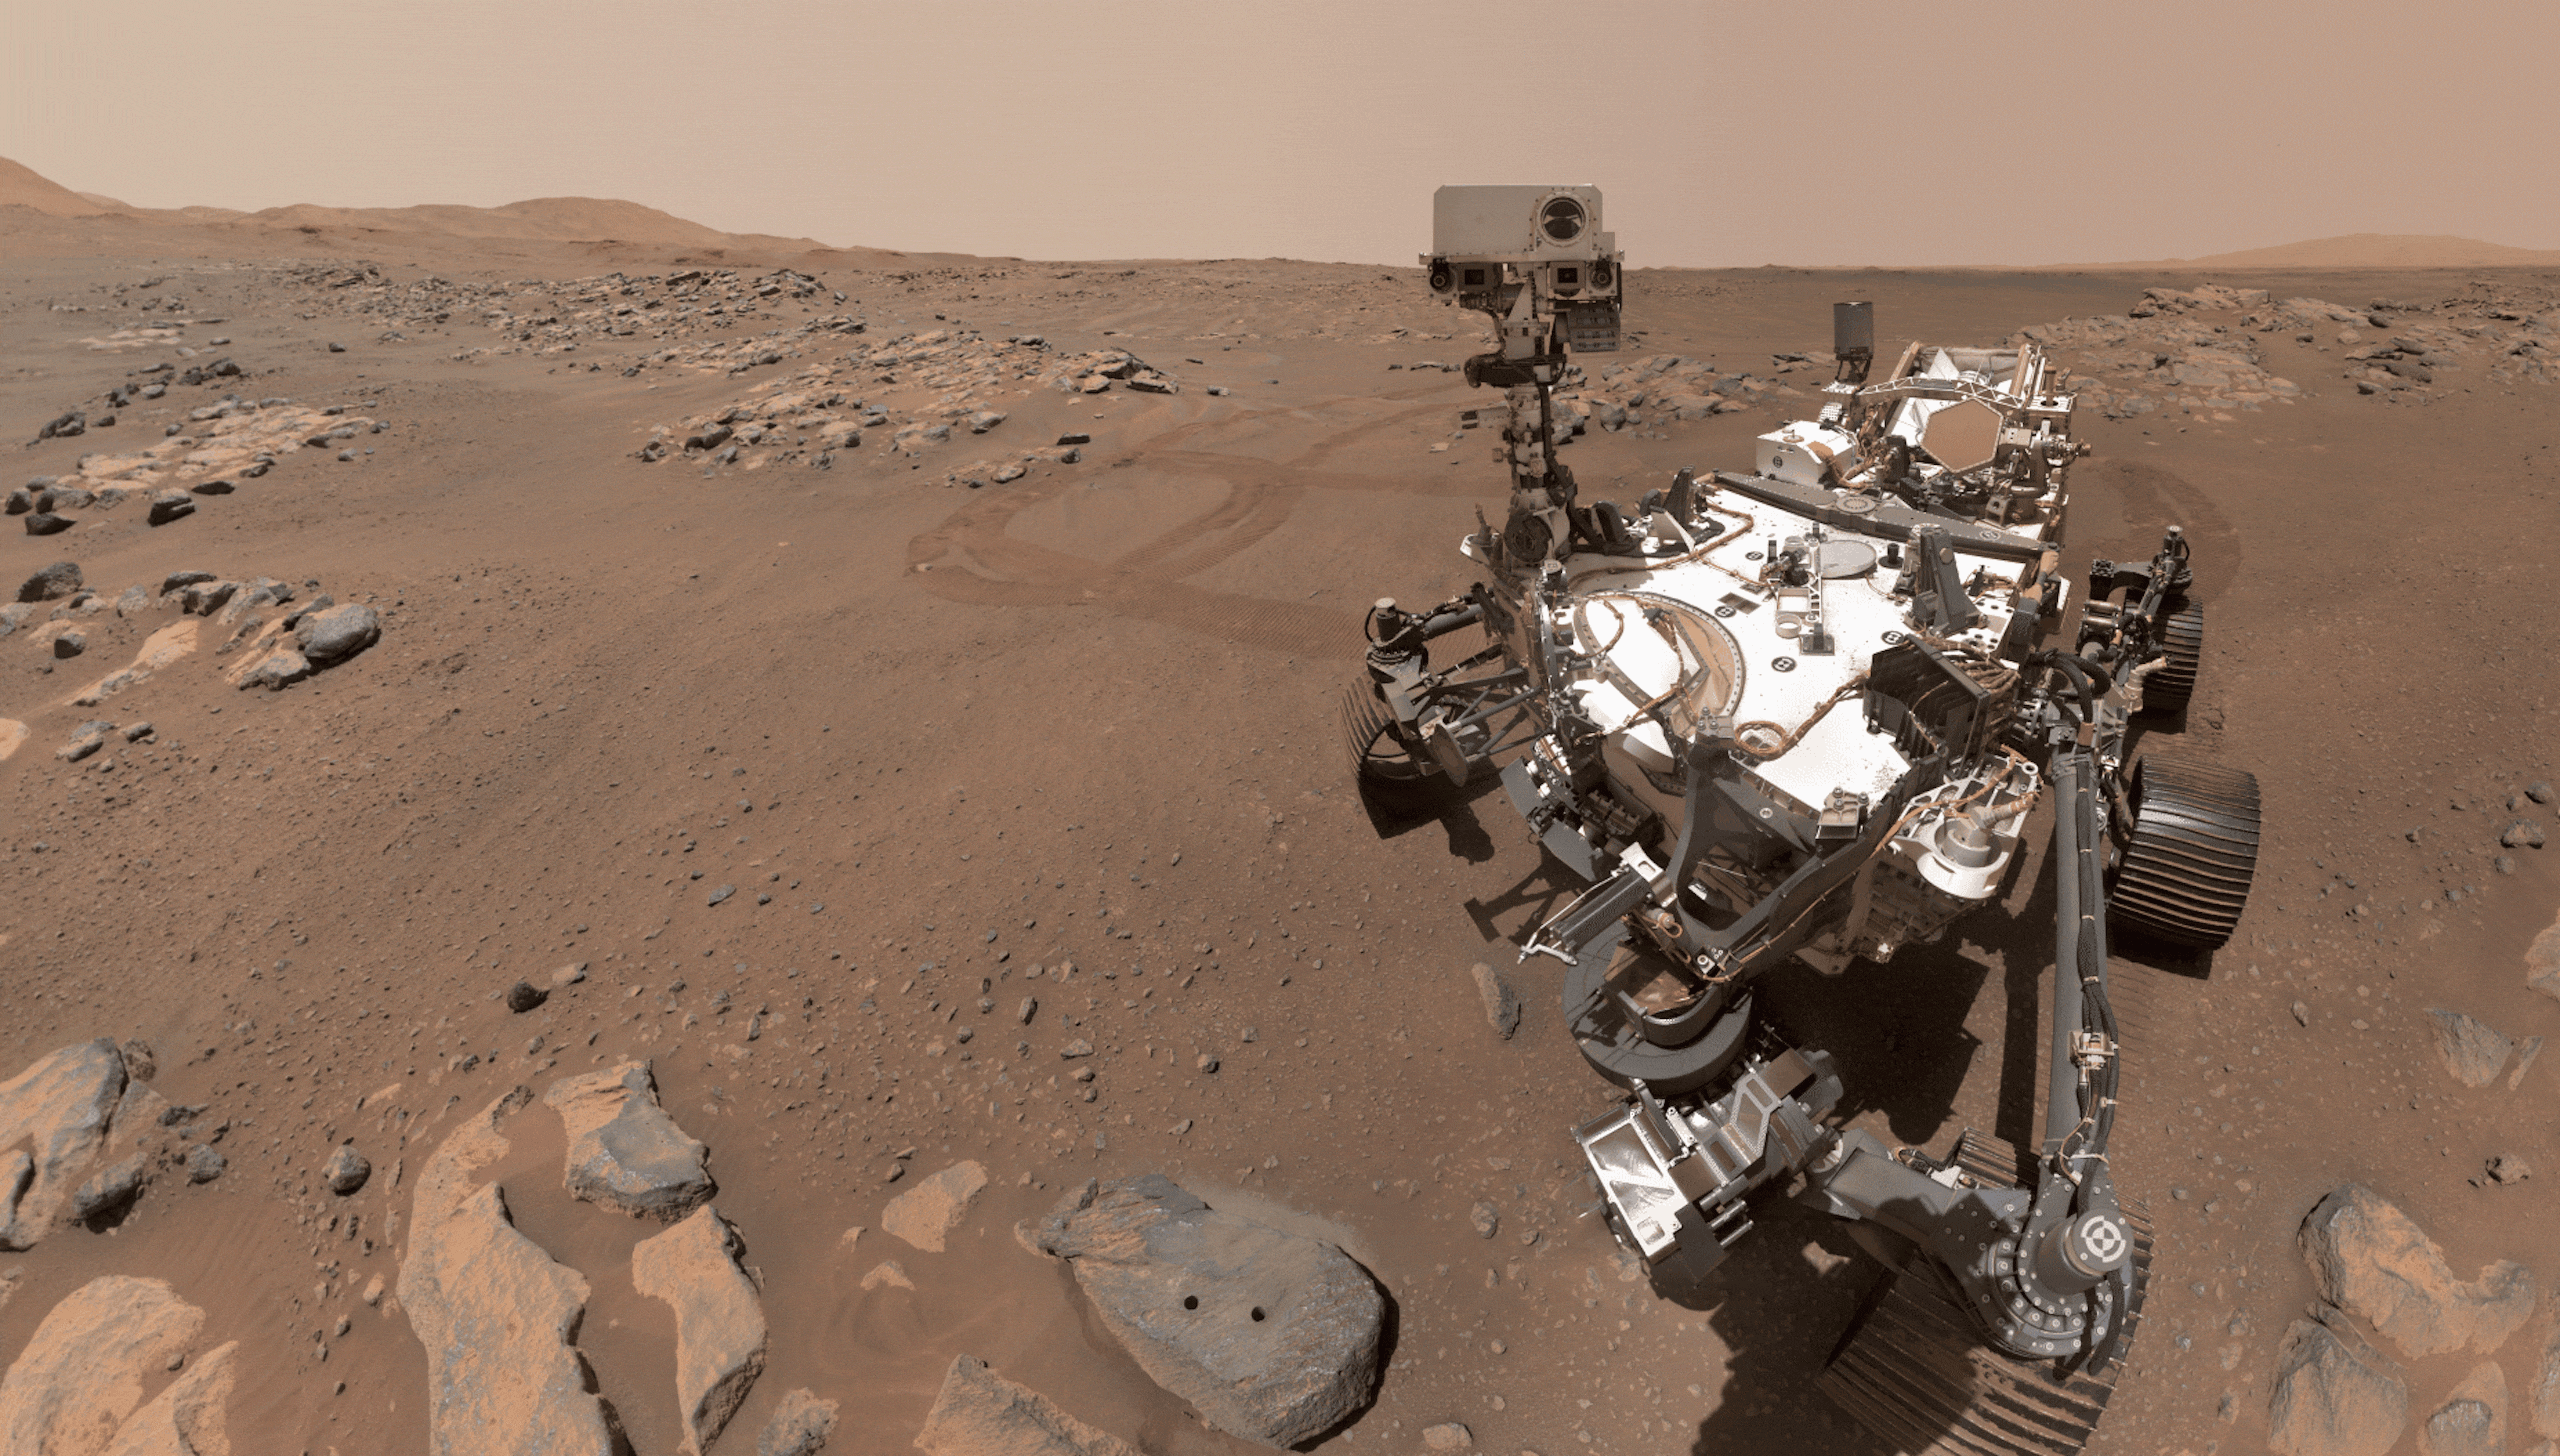 Perseverance rover taking a selfie on Mars.